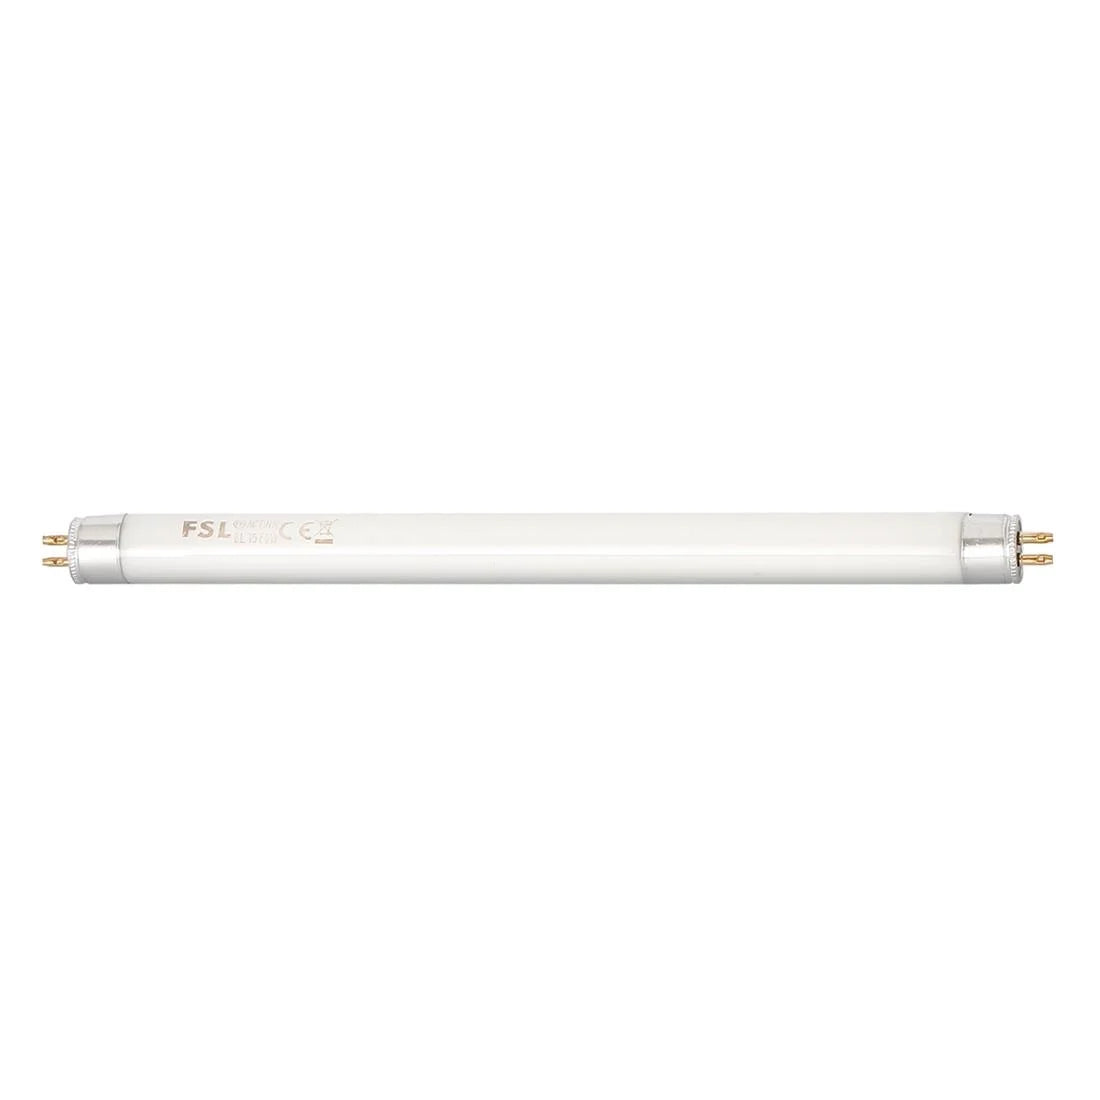 Replacement 6W Fluorescent Tube for Eazyzap Fly Killers.Product Ref:00738.Model:AC829. 🚚 3-5 Days Delivery